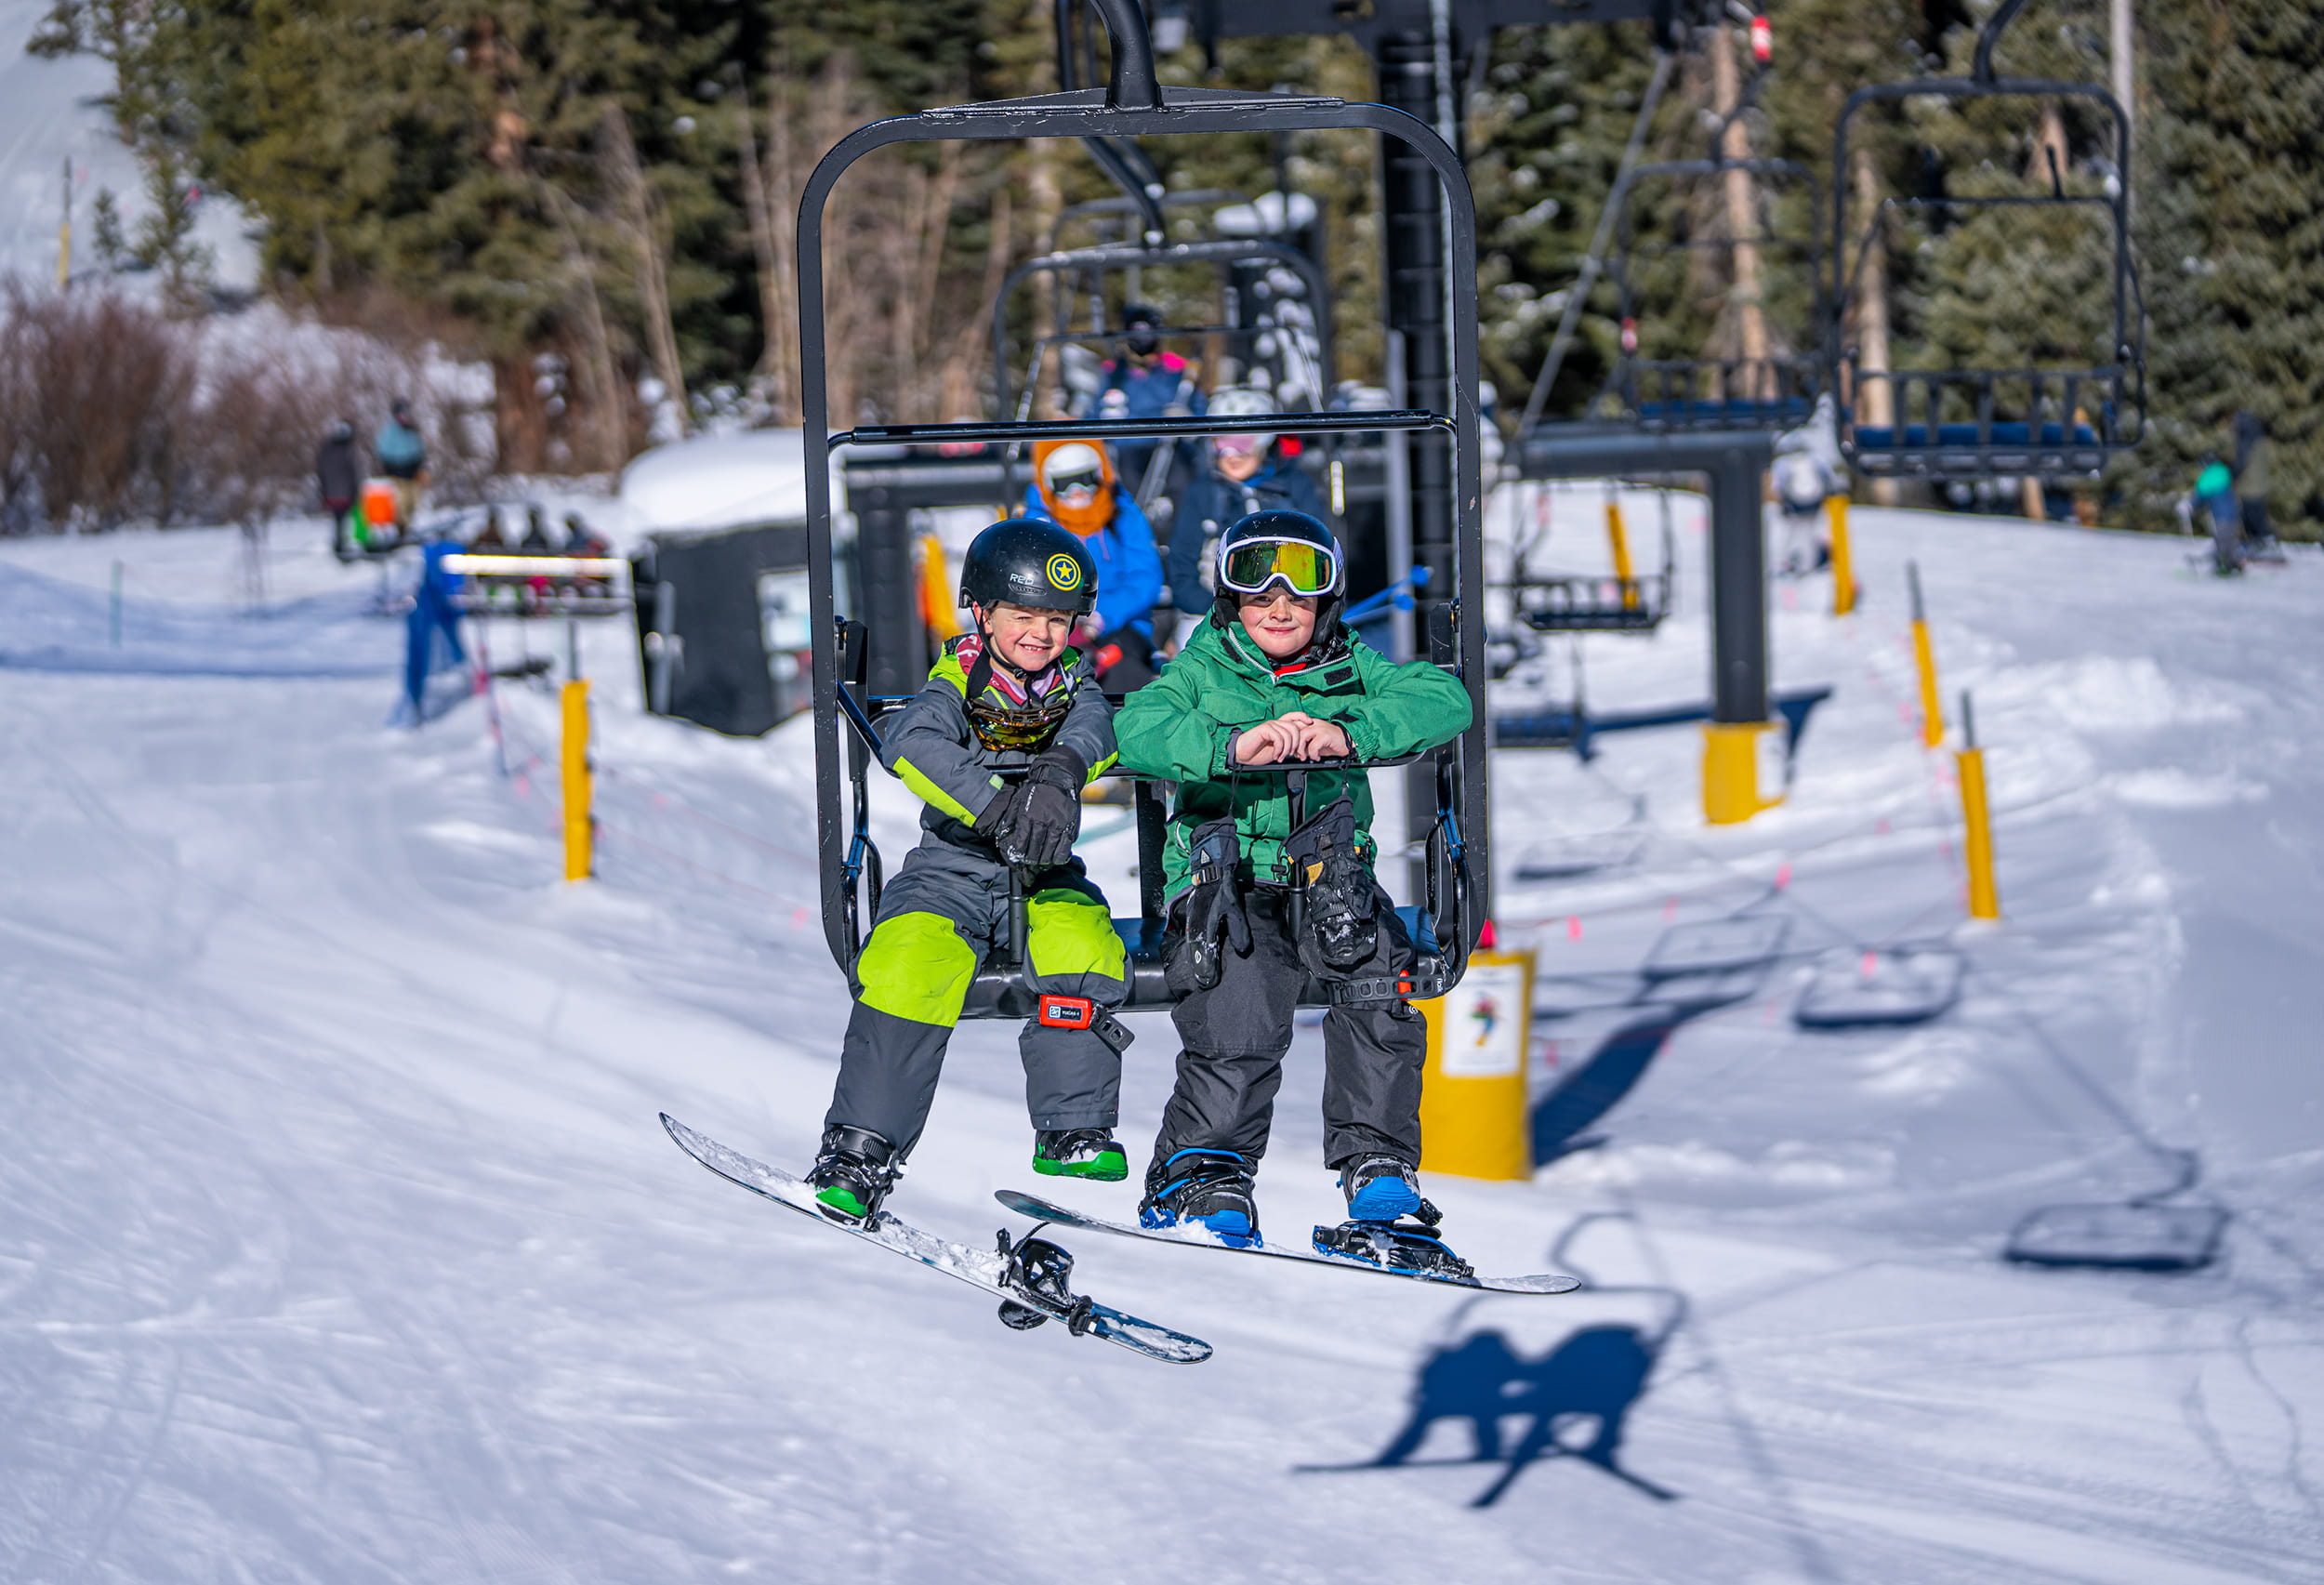 2 kids on a chairlift during a lesson